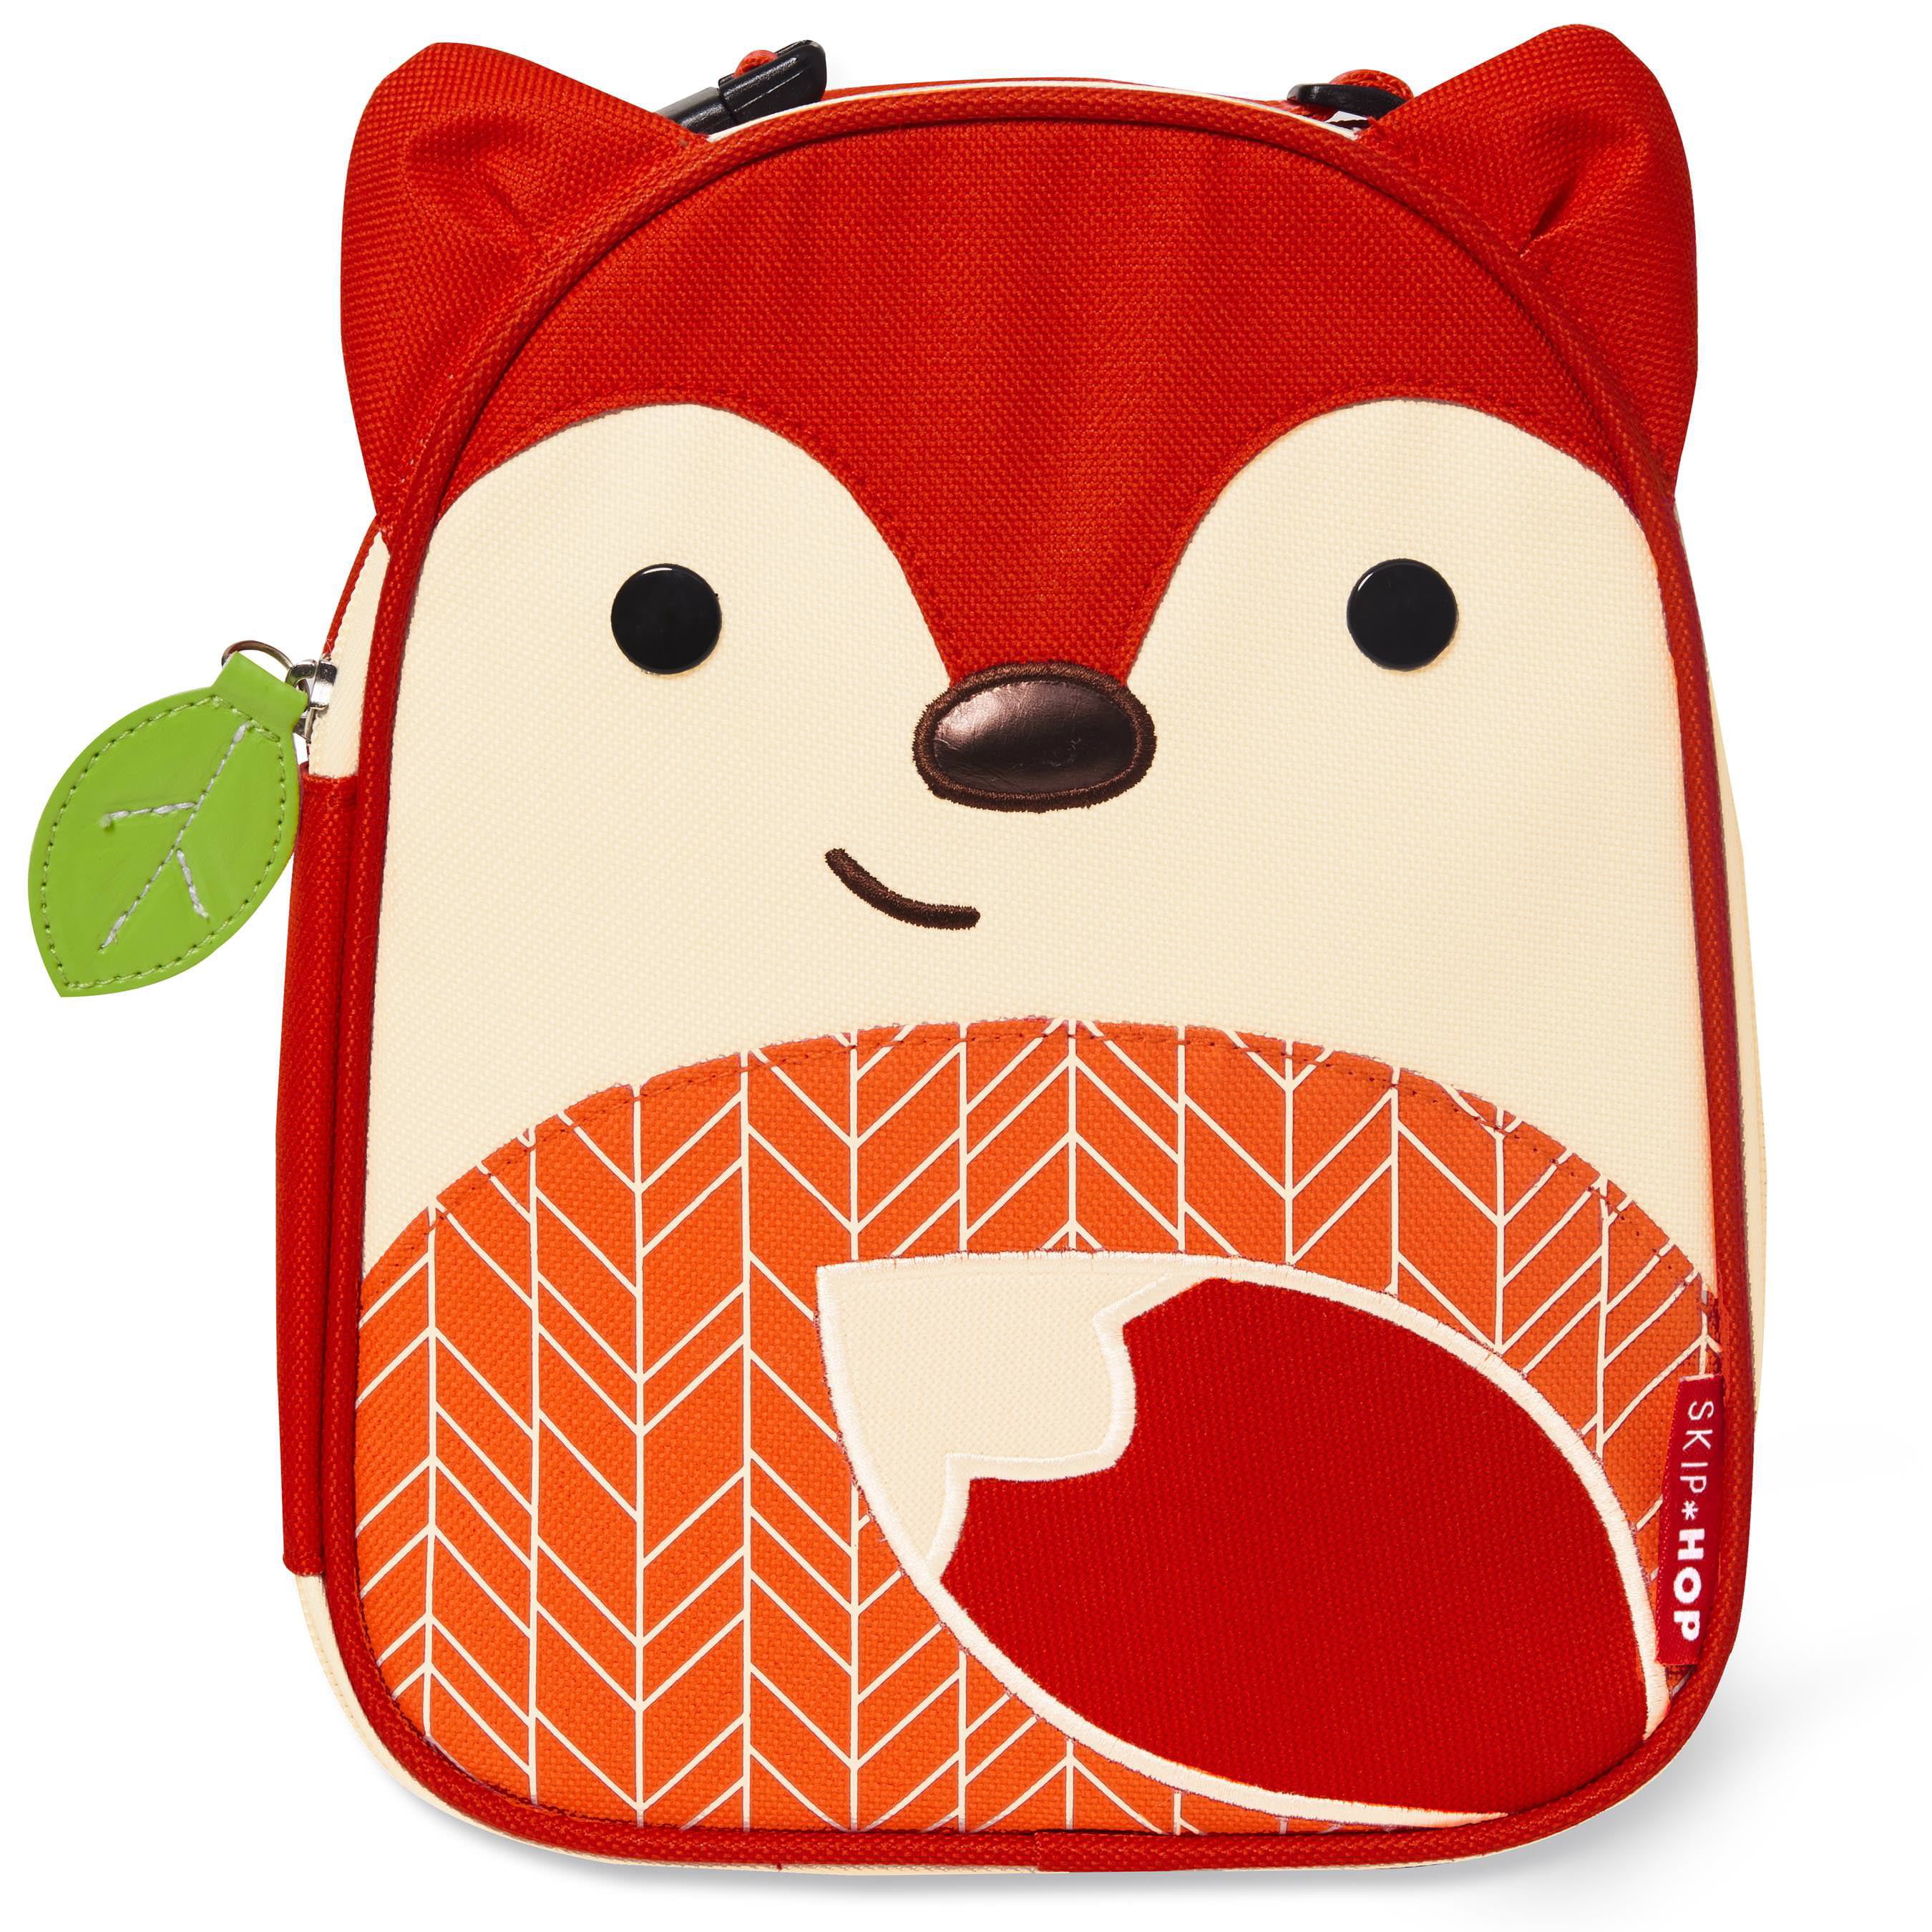  Skip Hop Zoo Lunchies Insulated Lunch Bags Only $9.49